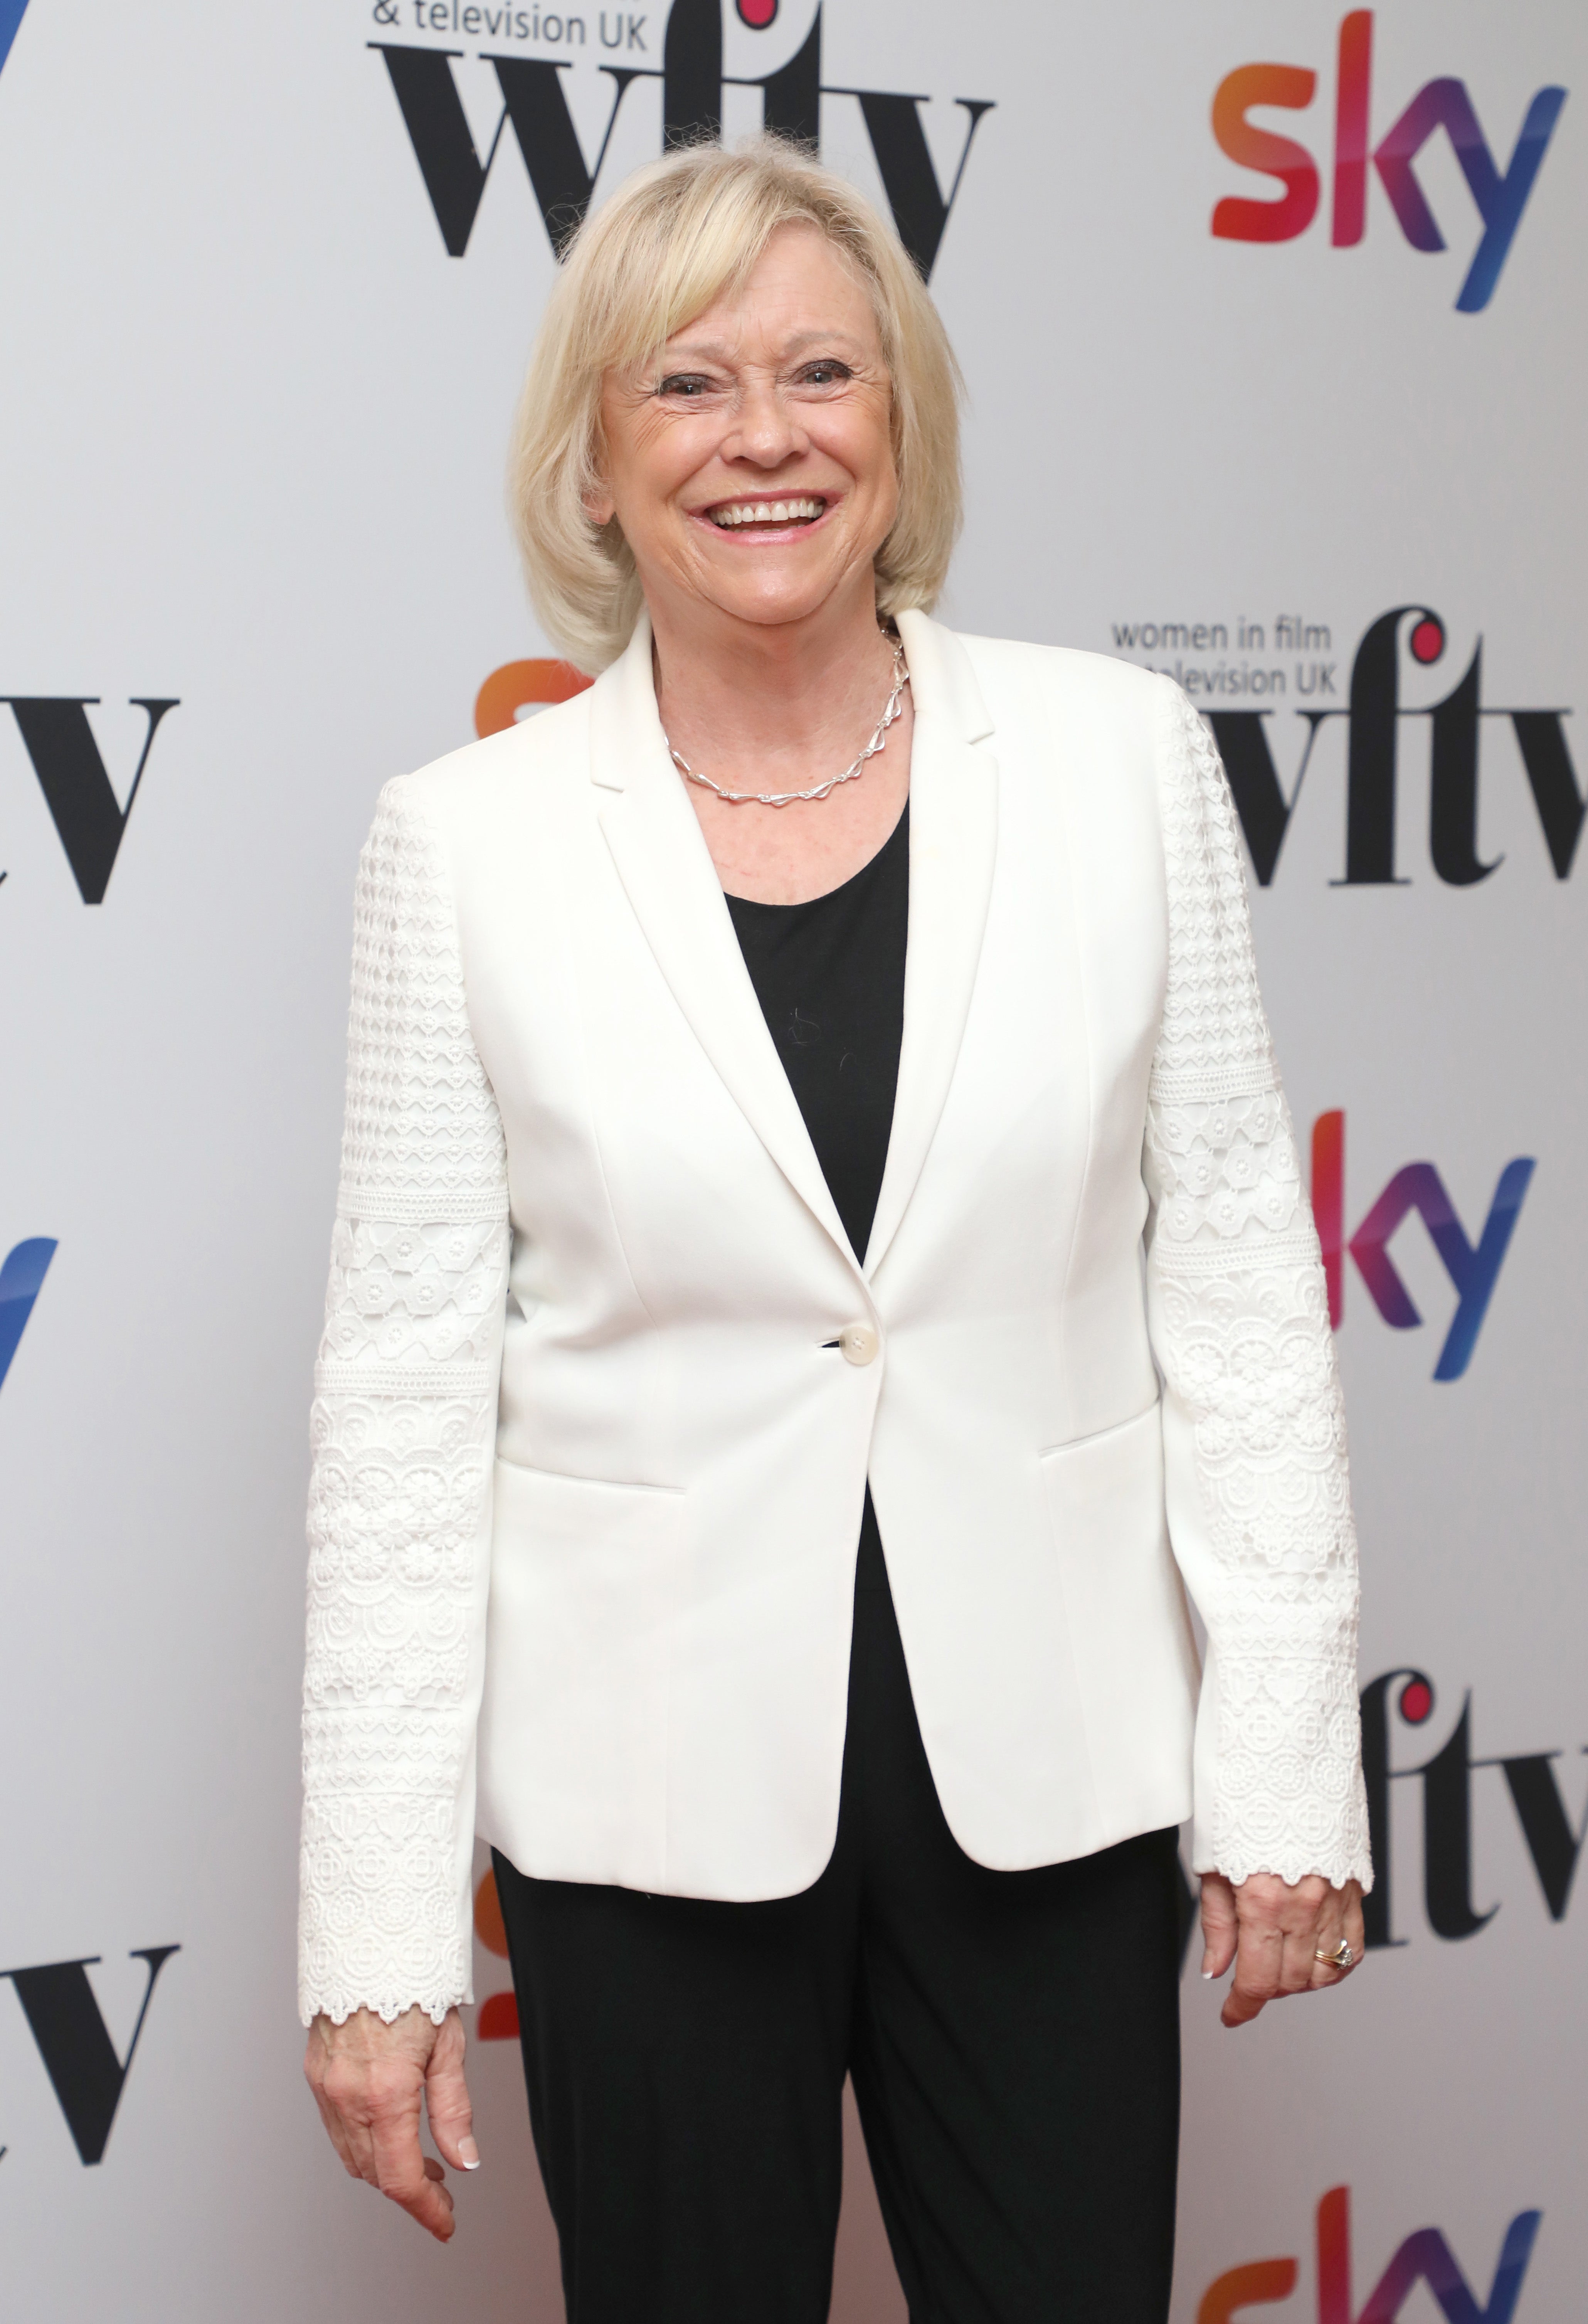 Sue Barker attends the "Sky Women In Film And TV Awards" 2022 at the London Hilton on December 02, 2022